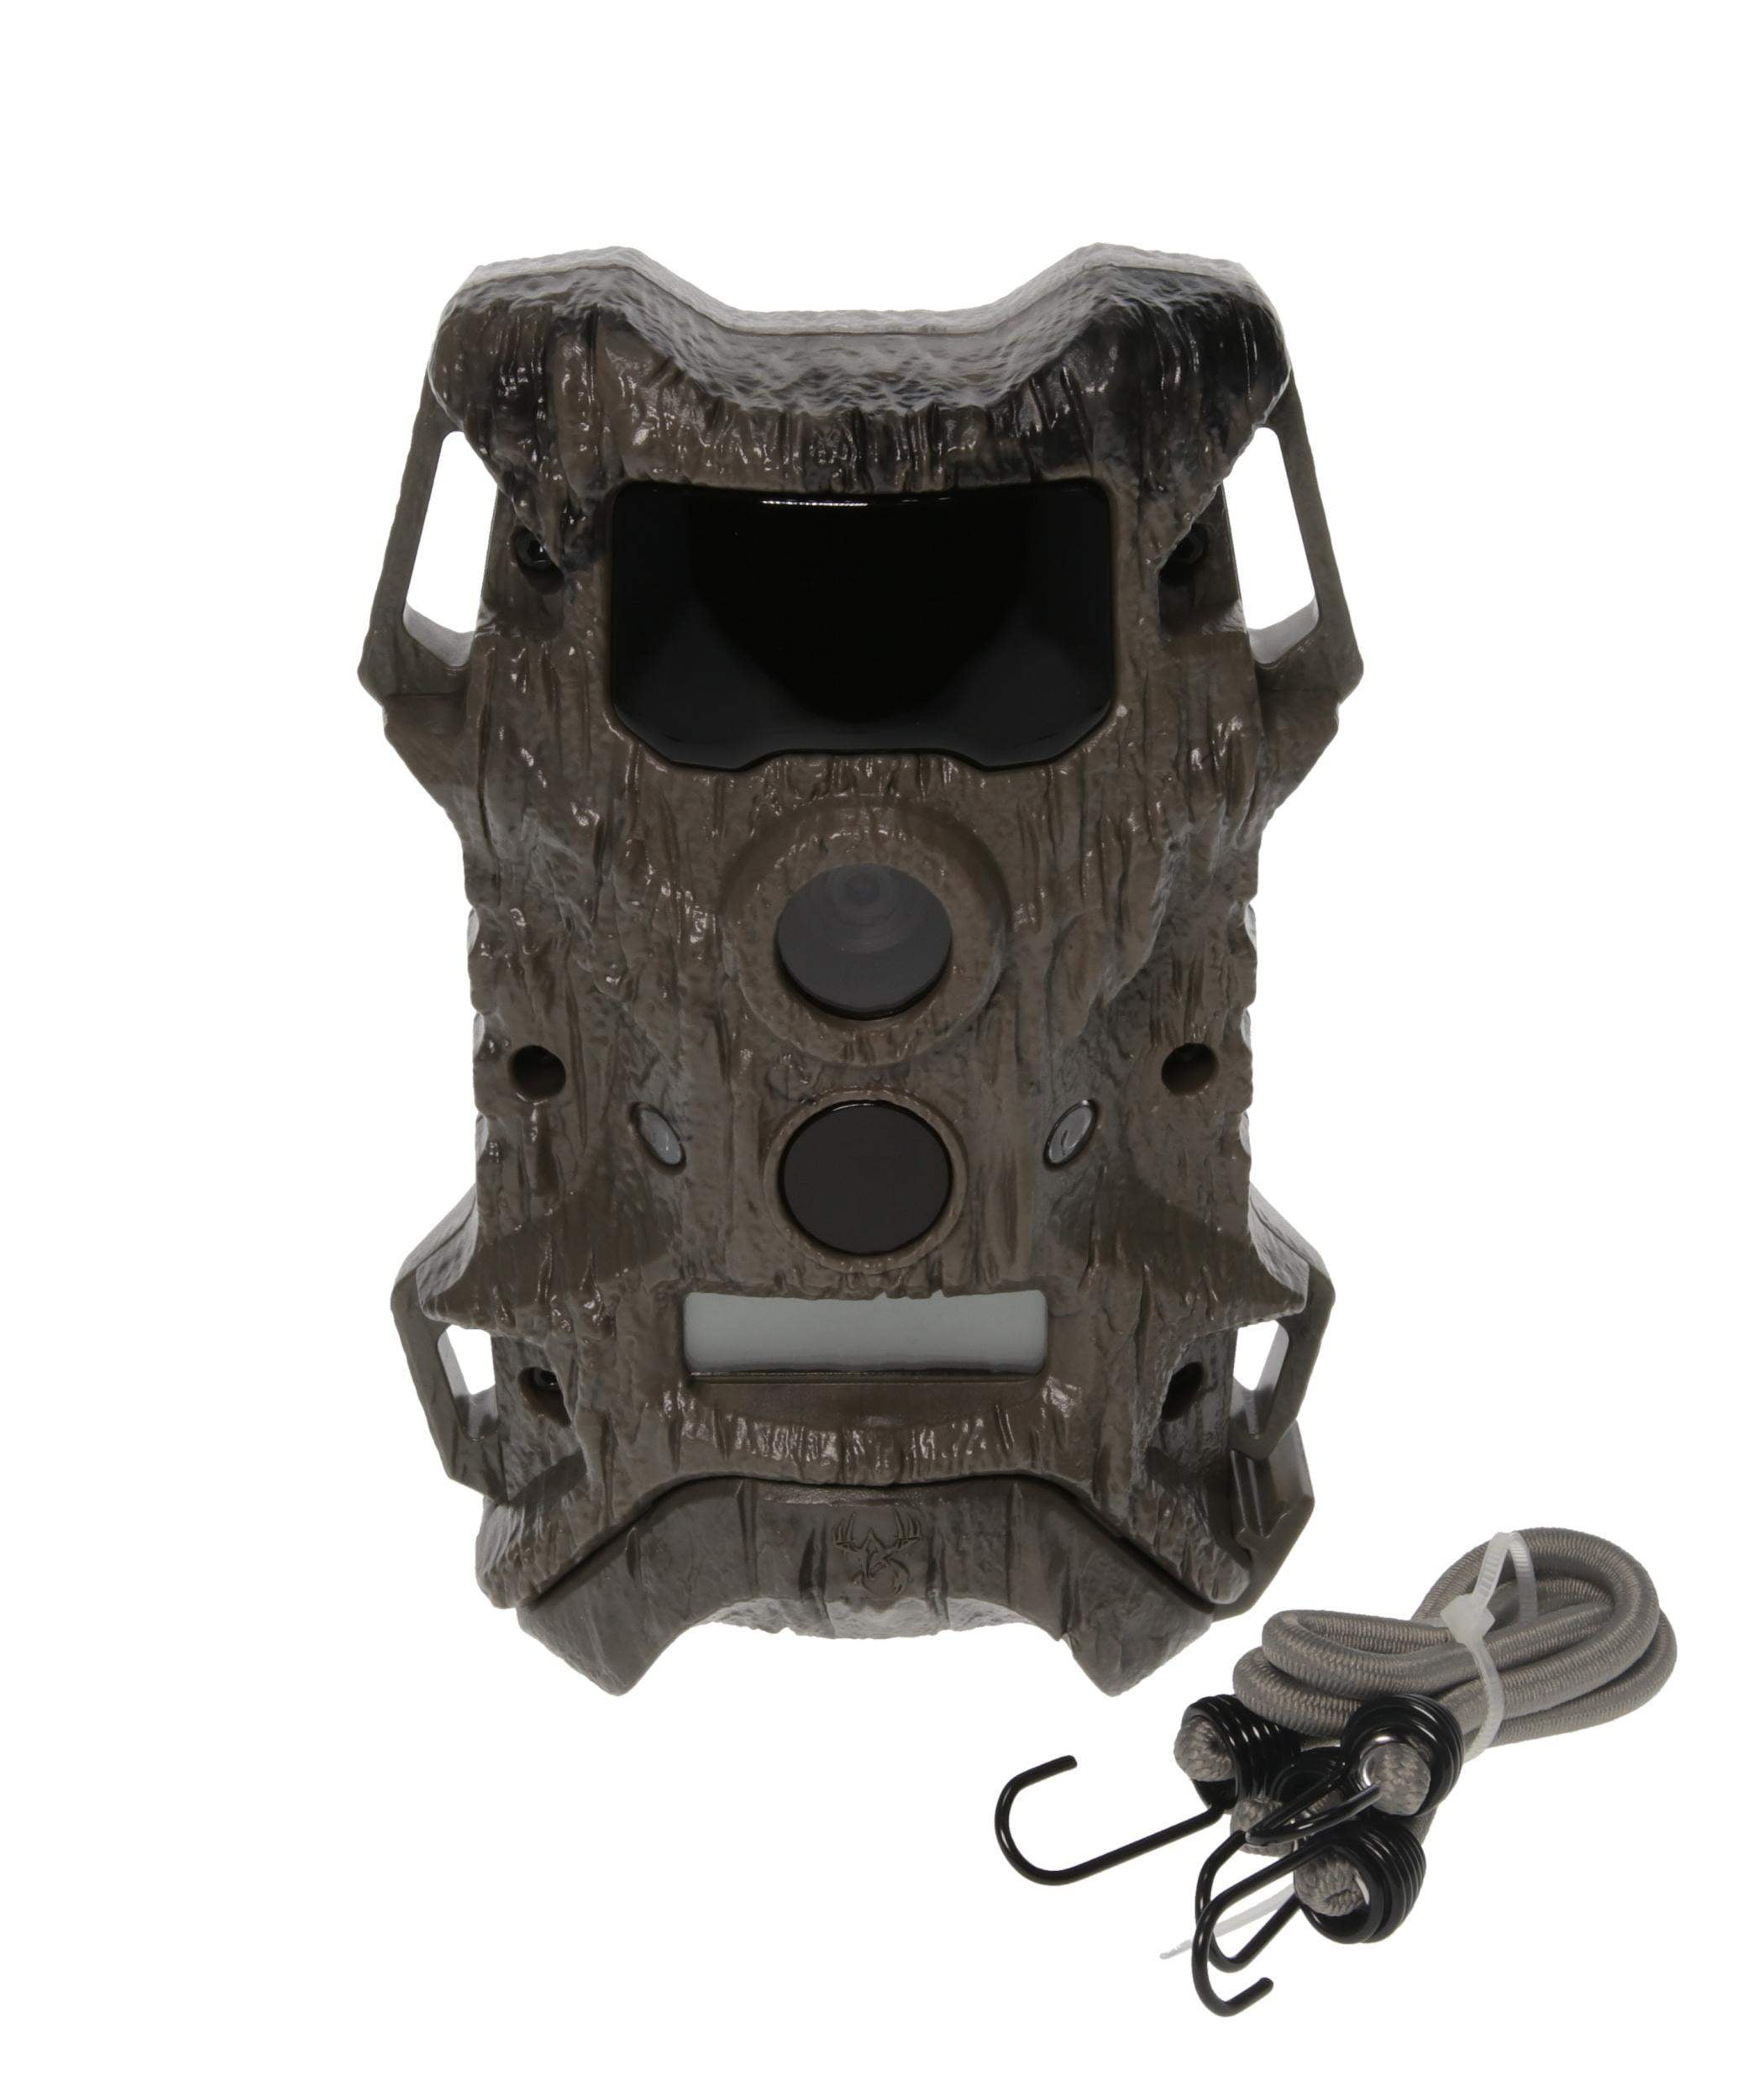 18 Mp Wildgame Innovations Scrapeline Lightsout Trail Game Deer Camera Package 